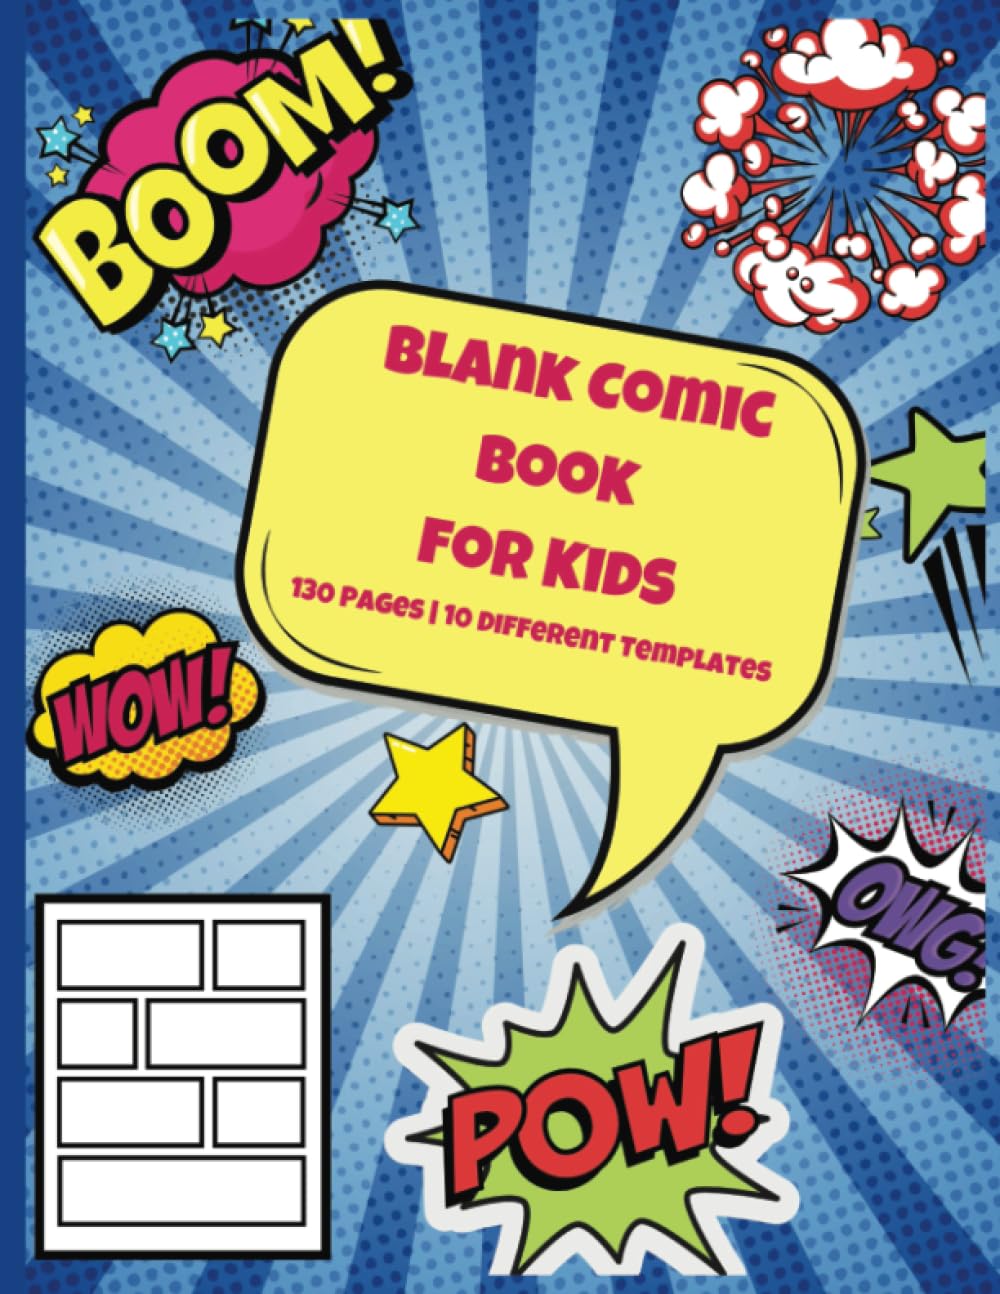 Unleash Creativity with our Blank Comic Book for Kids - 130 Pages, 10 Templates, 8.5 x 11 Inches (German Edition)